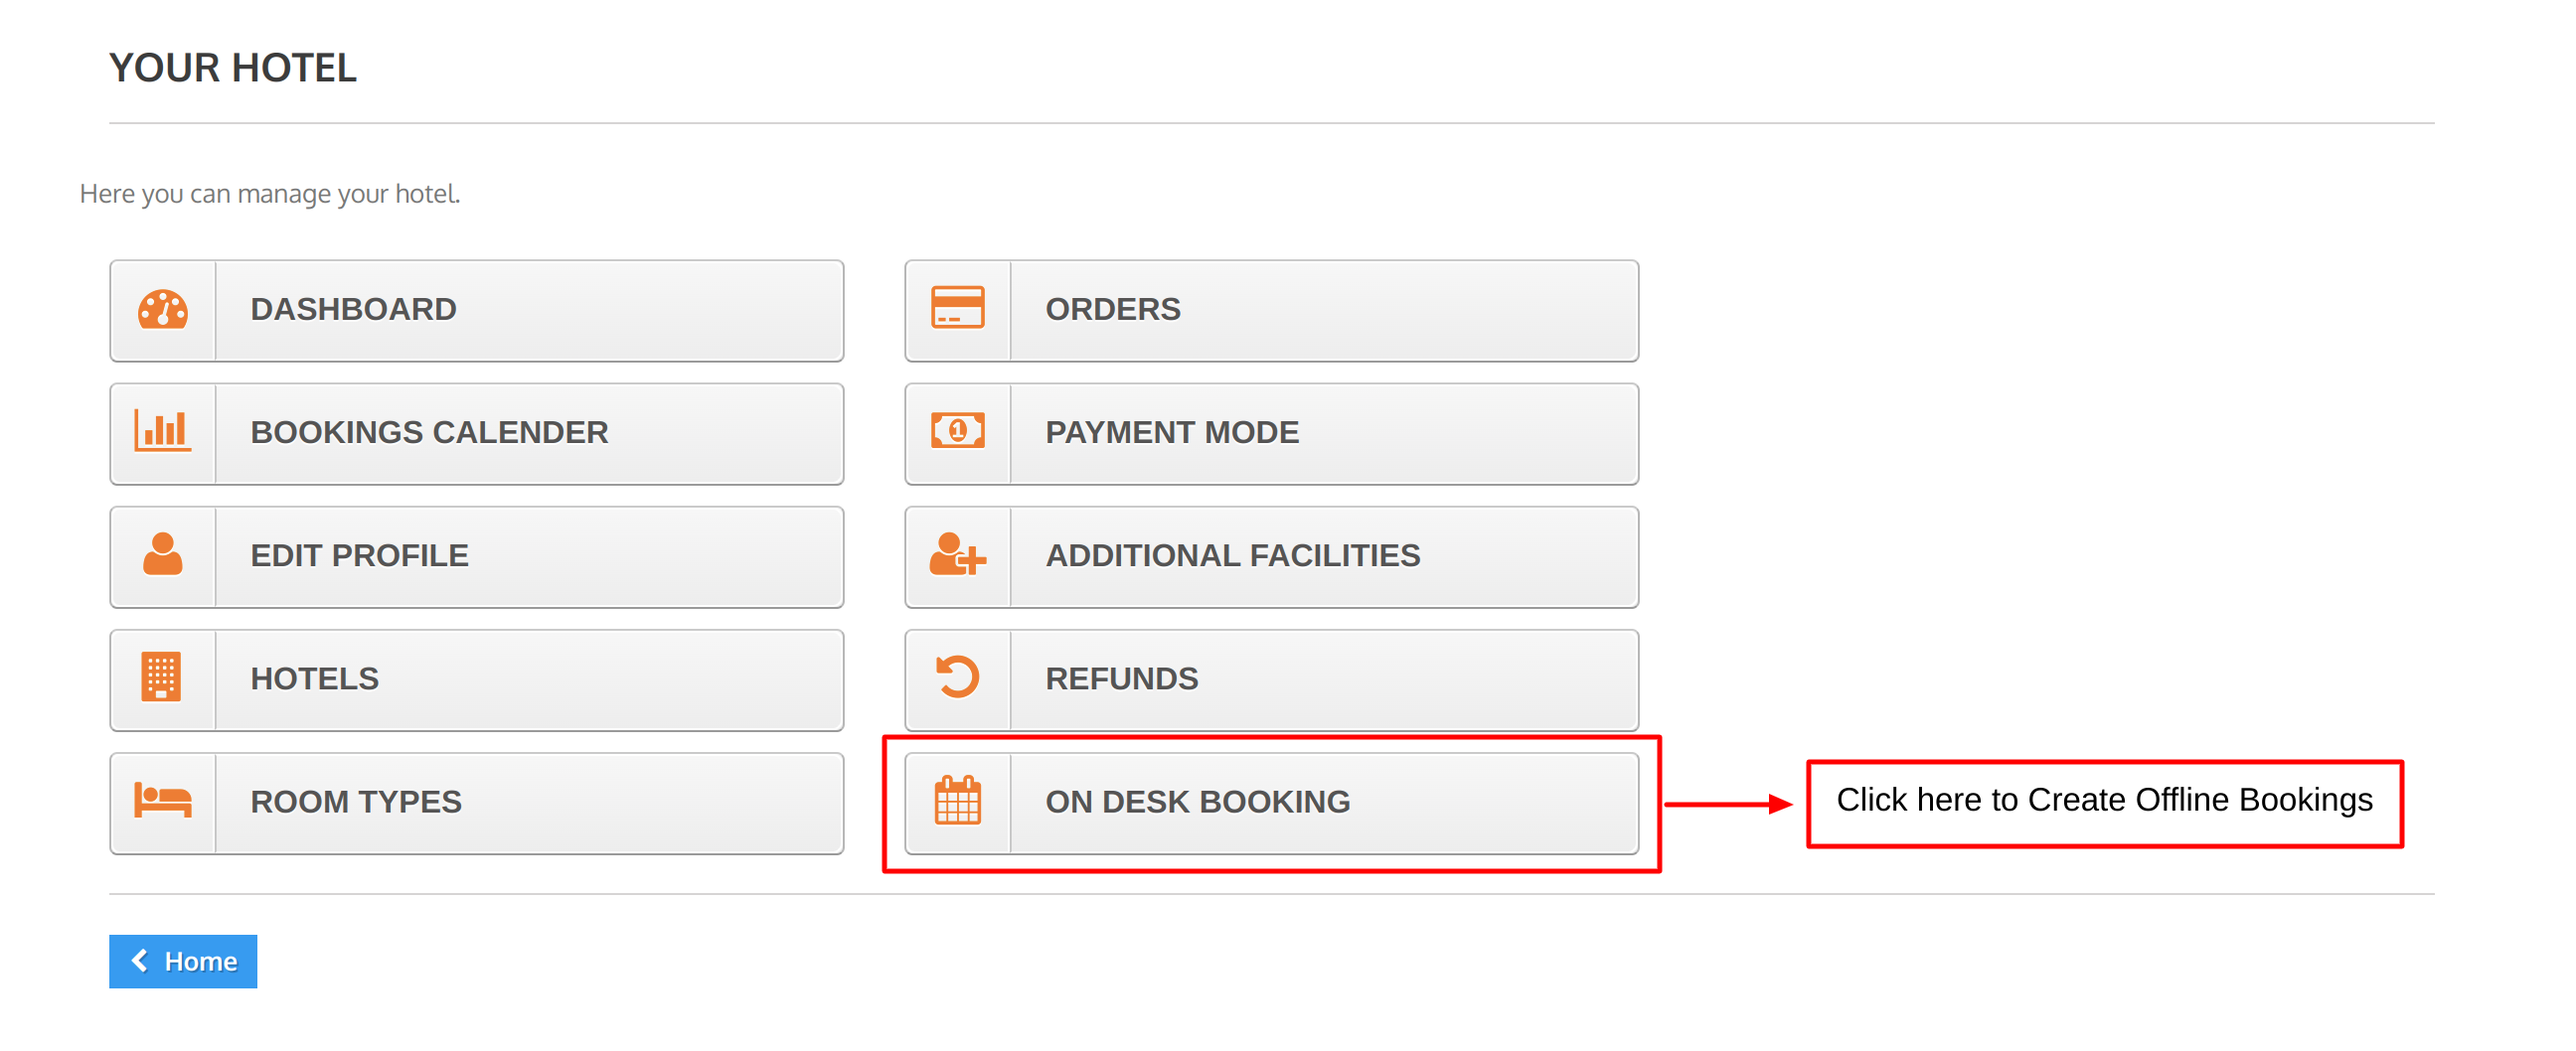 On desk booking option in accounts section of seller